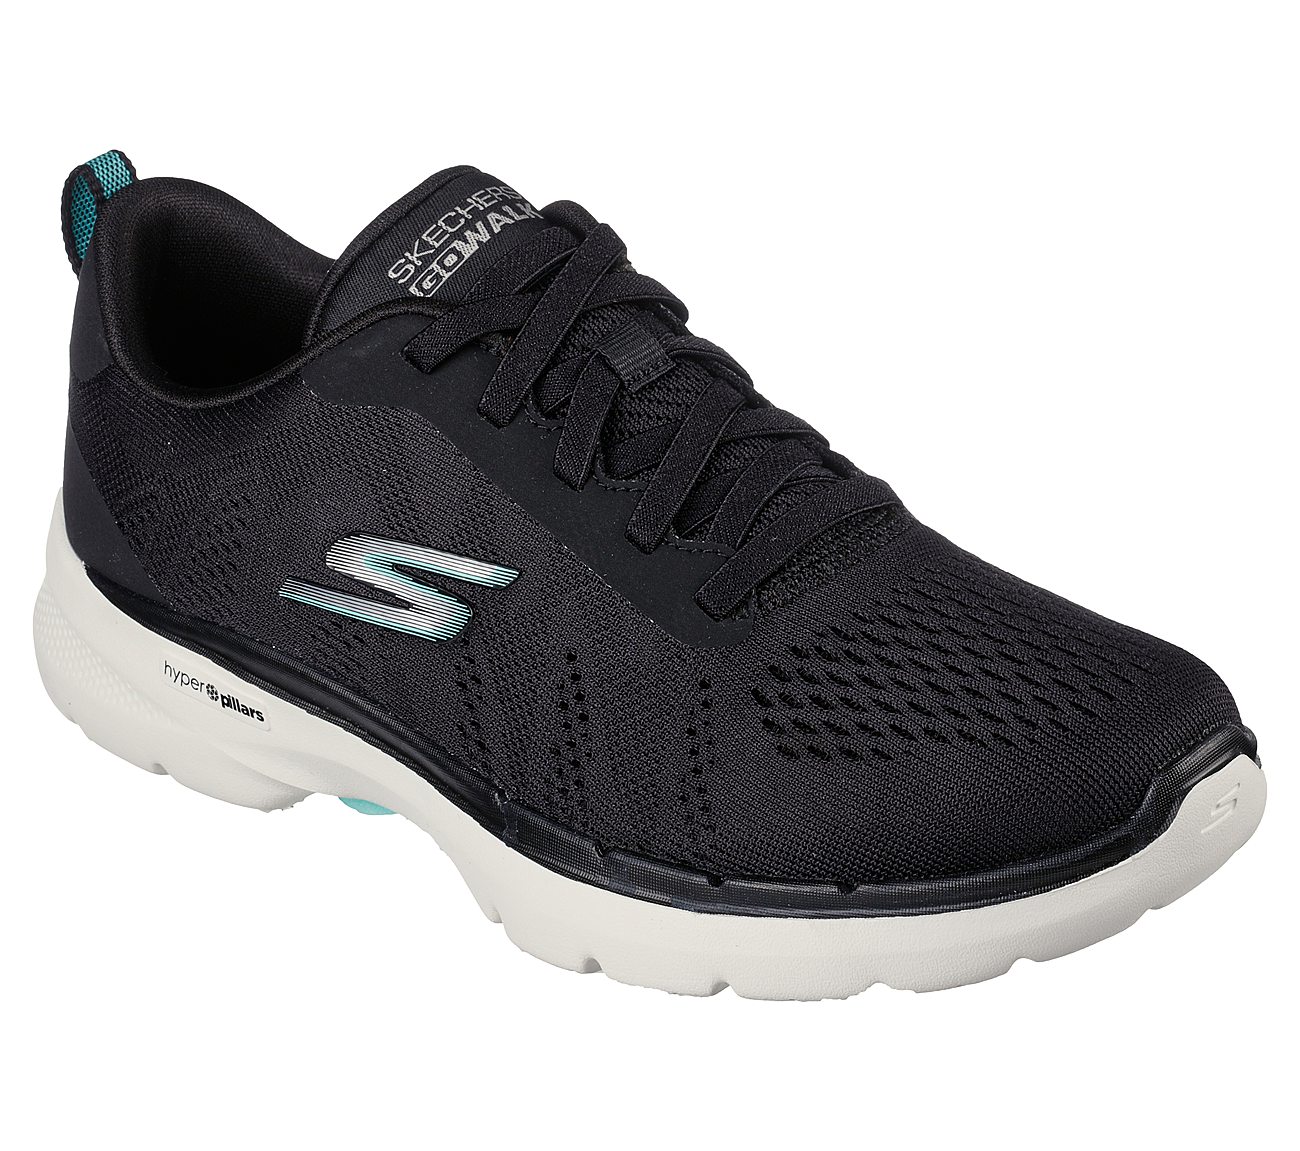 GO WALK 6, BLACK/TURQUOISE Footwear Right View